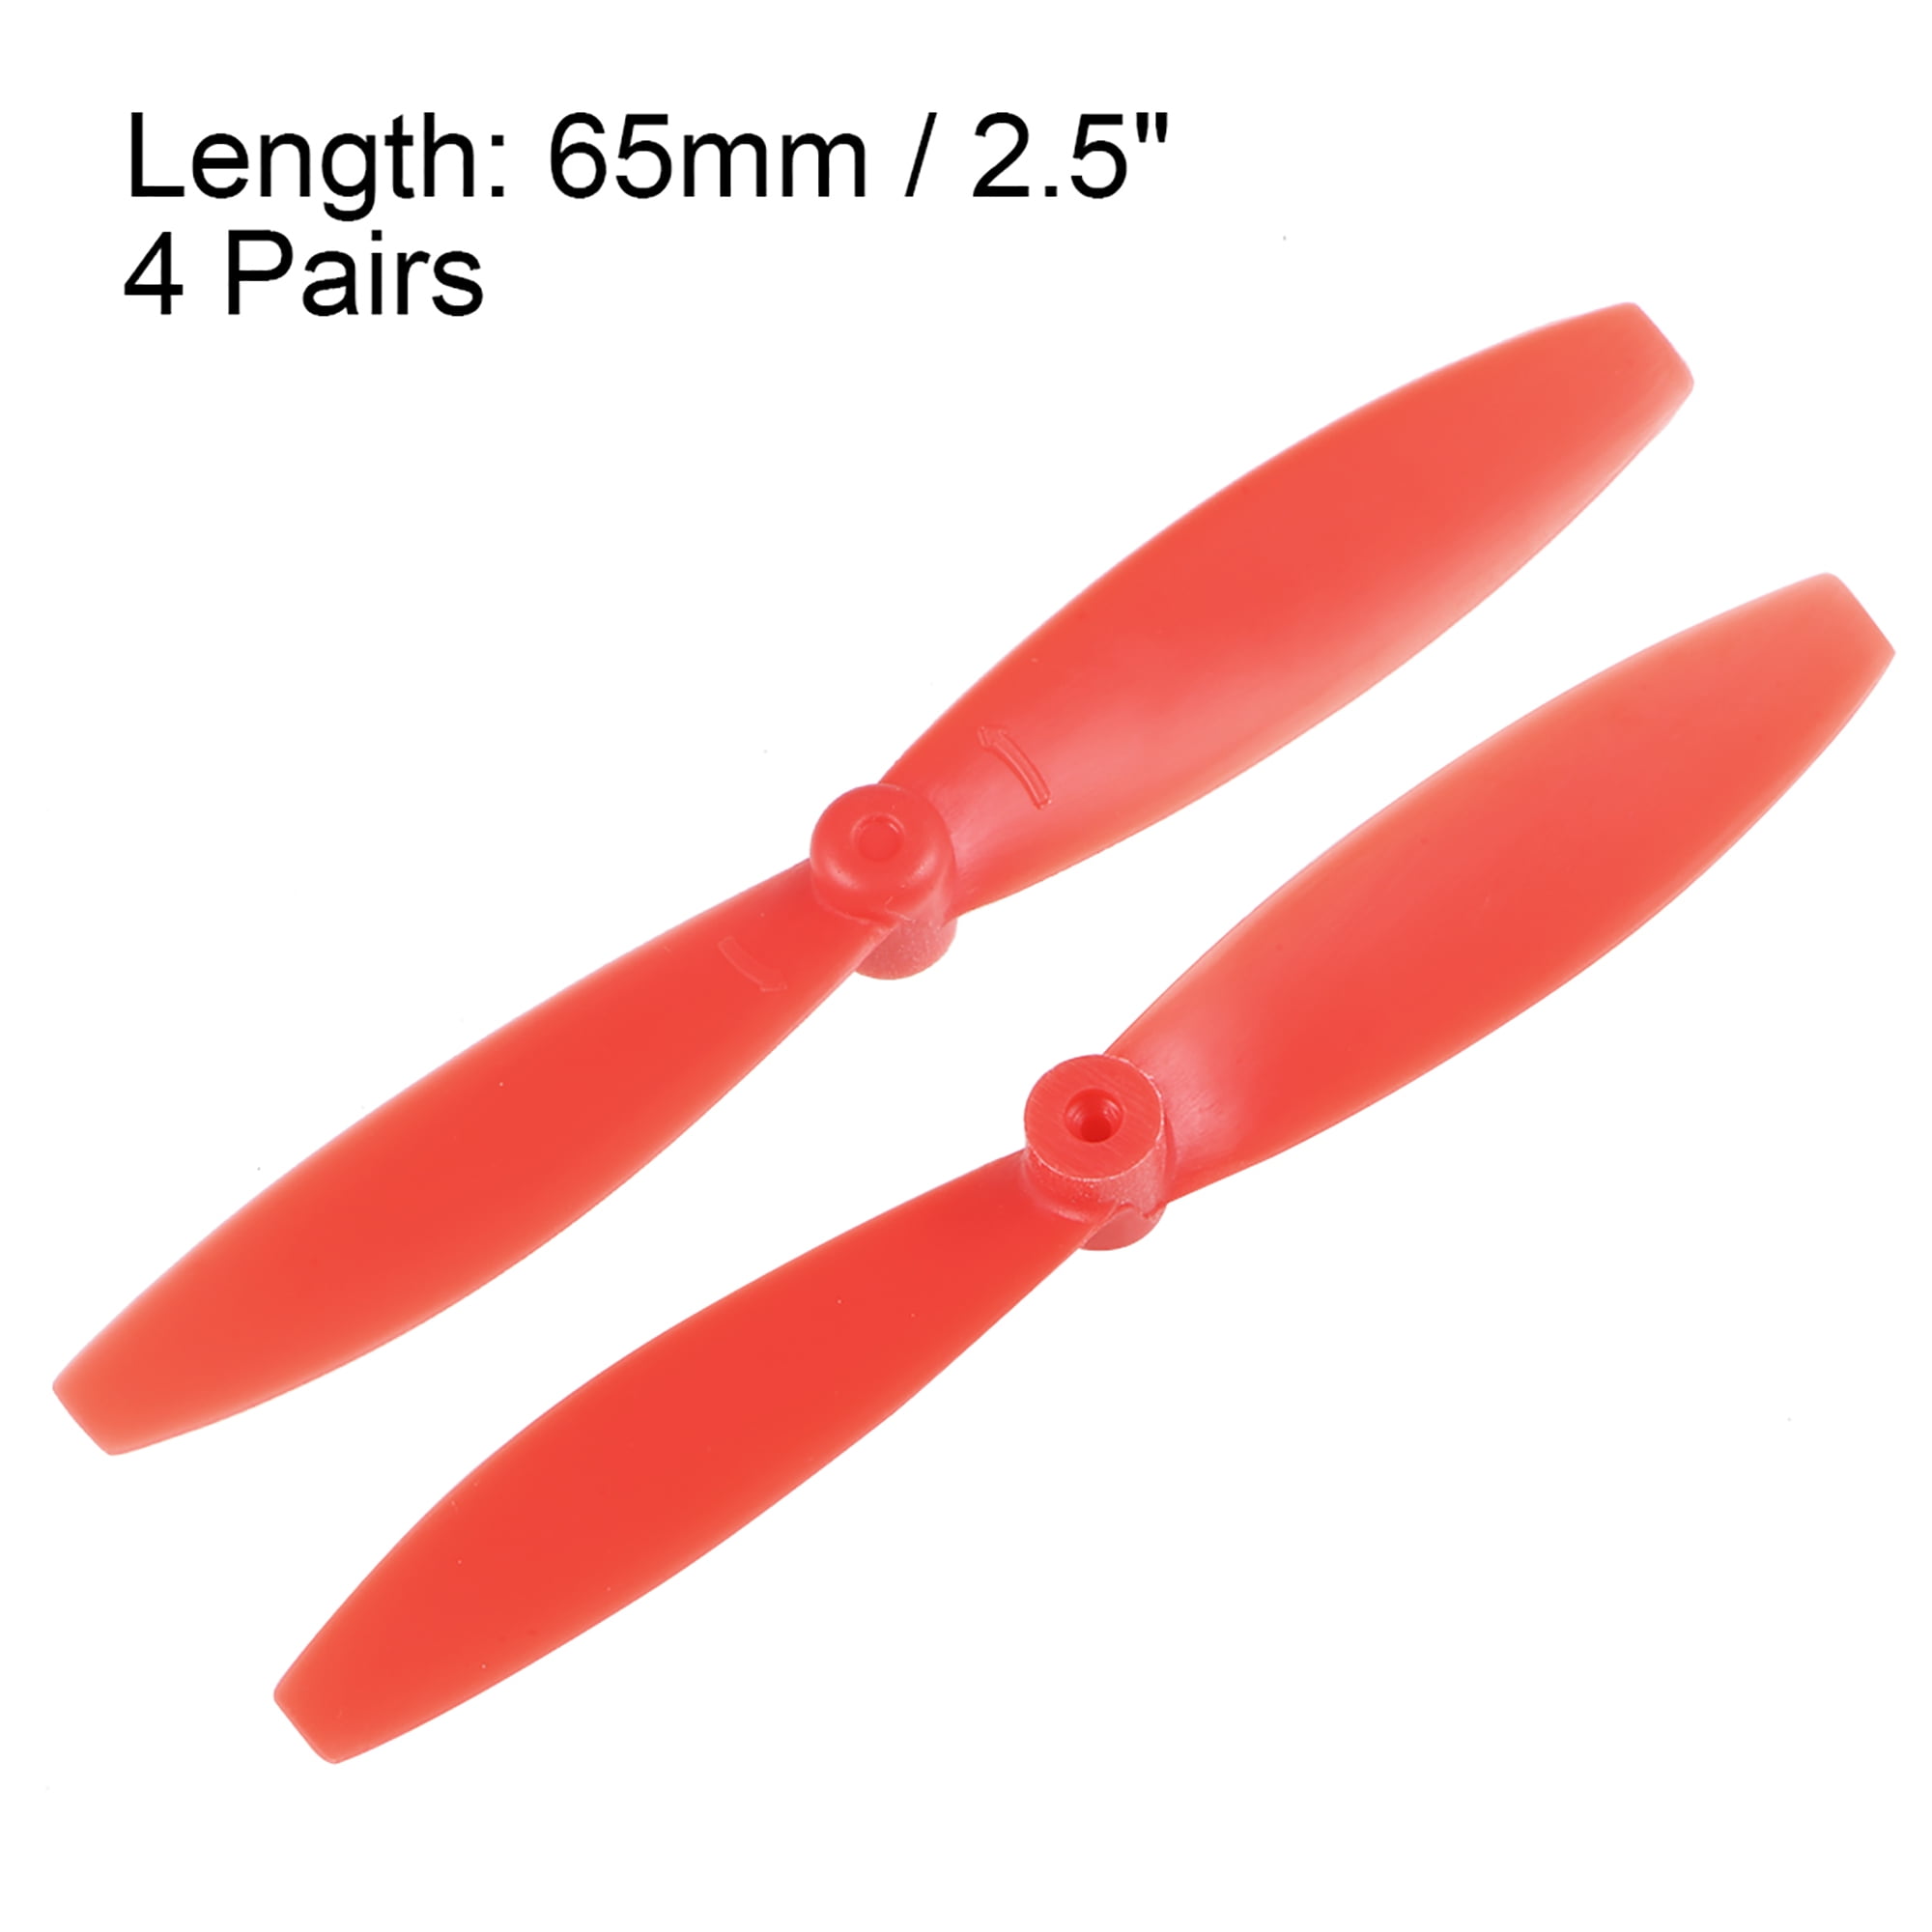 CW & CCW 2 pairs 65MM Micro Prop for Brushed Motors Red